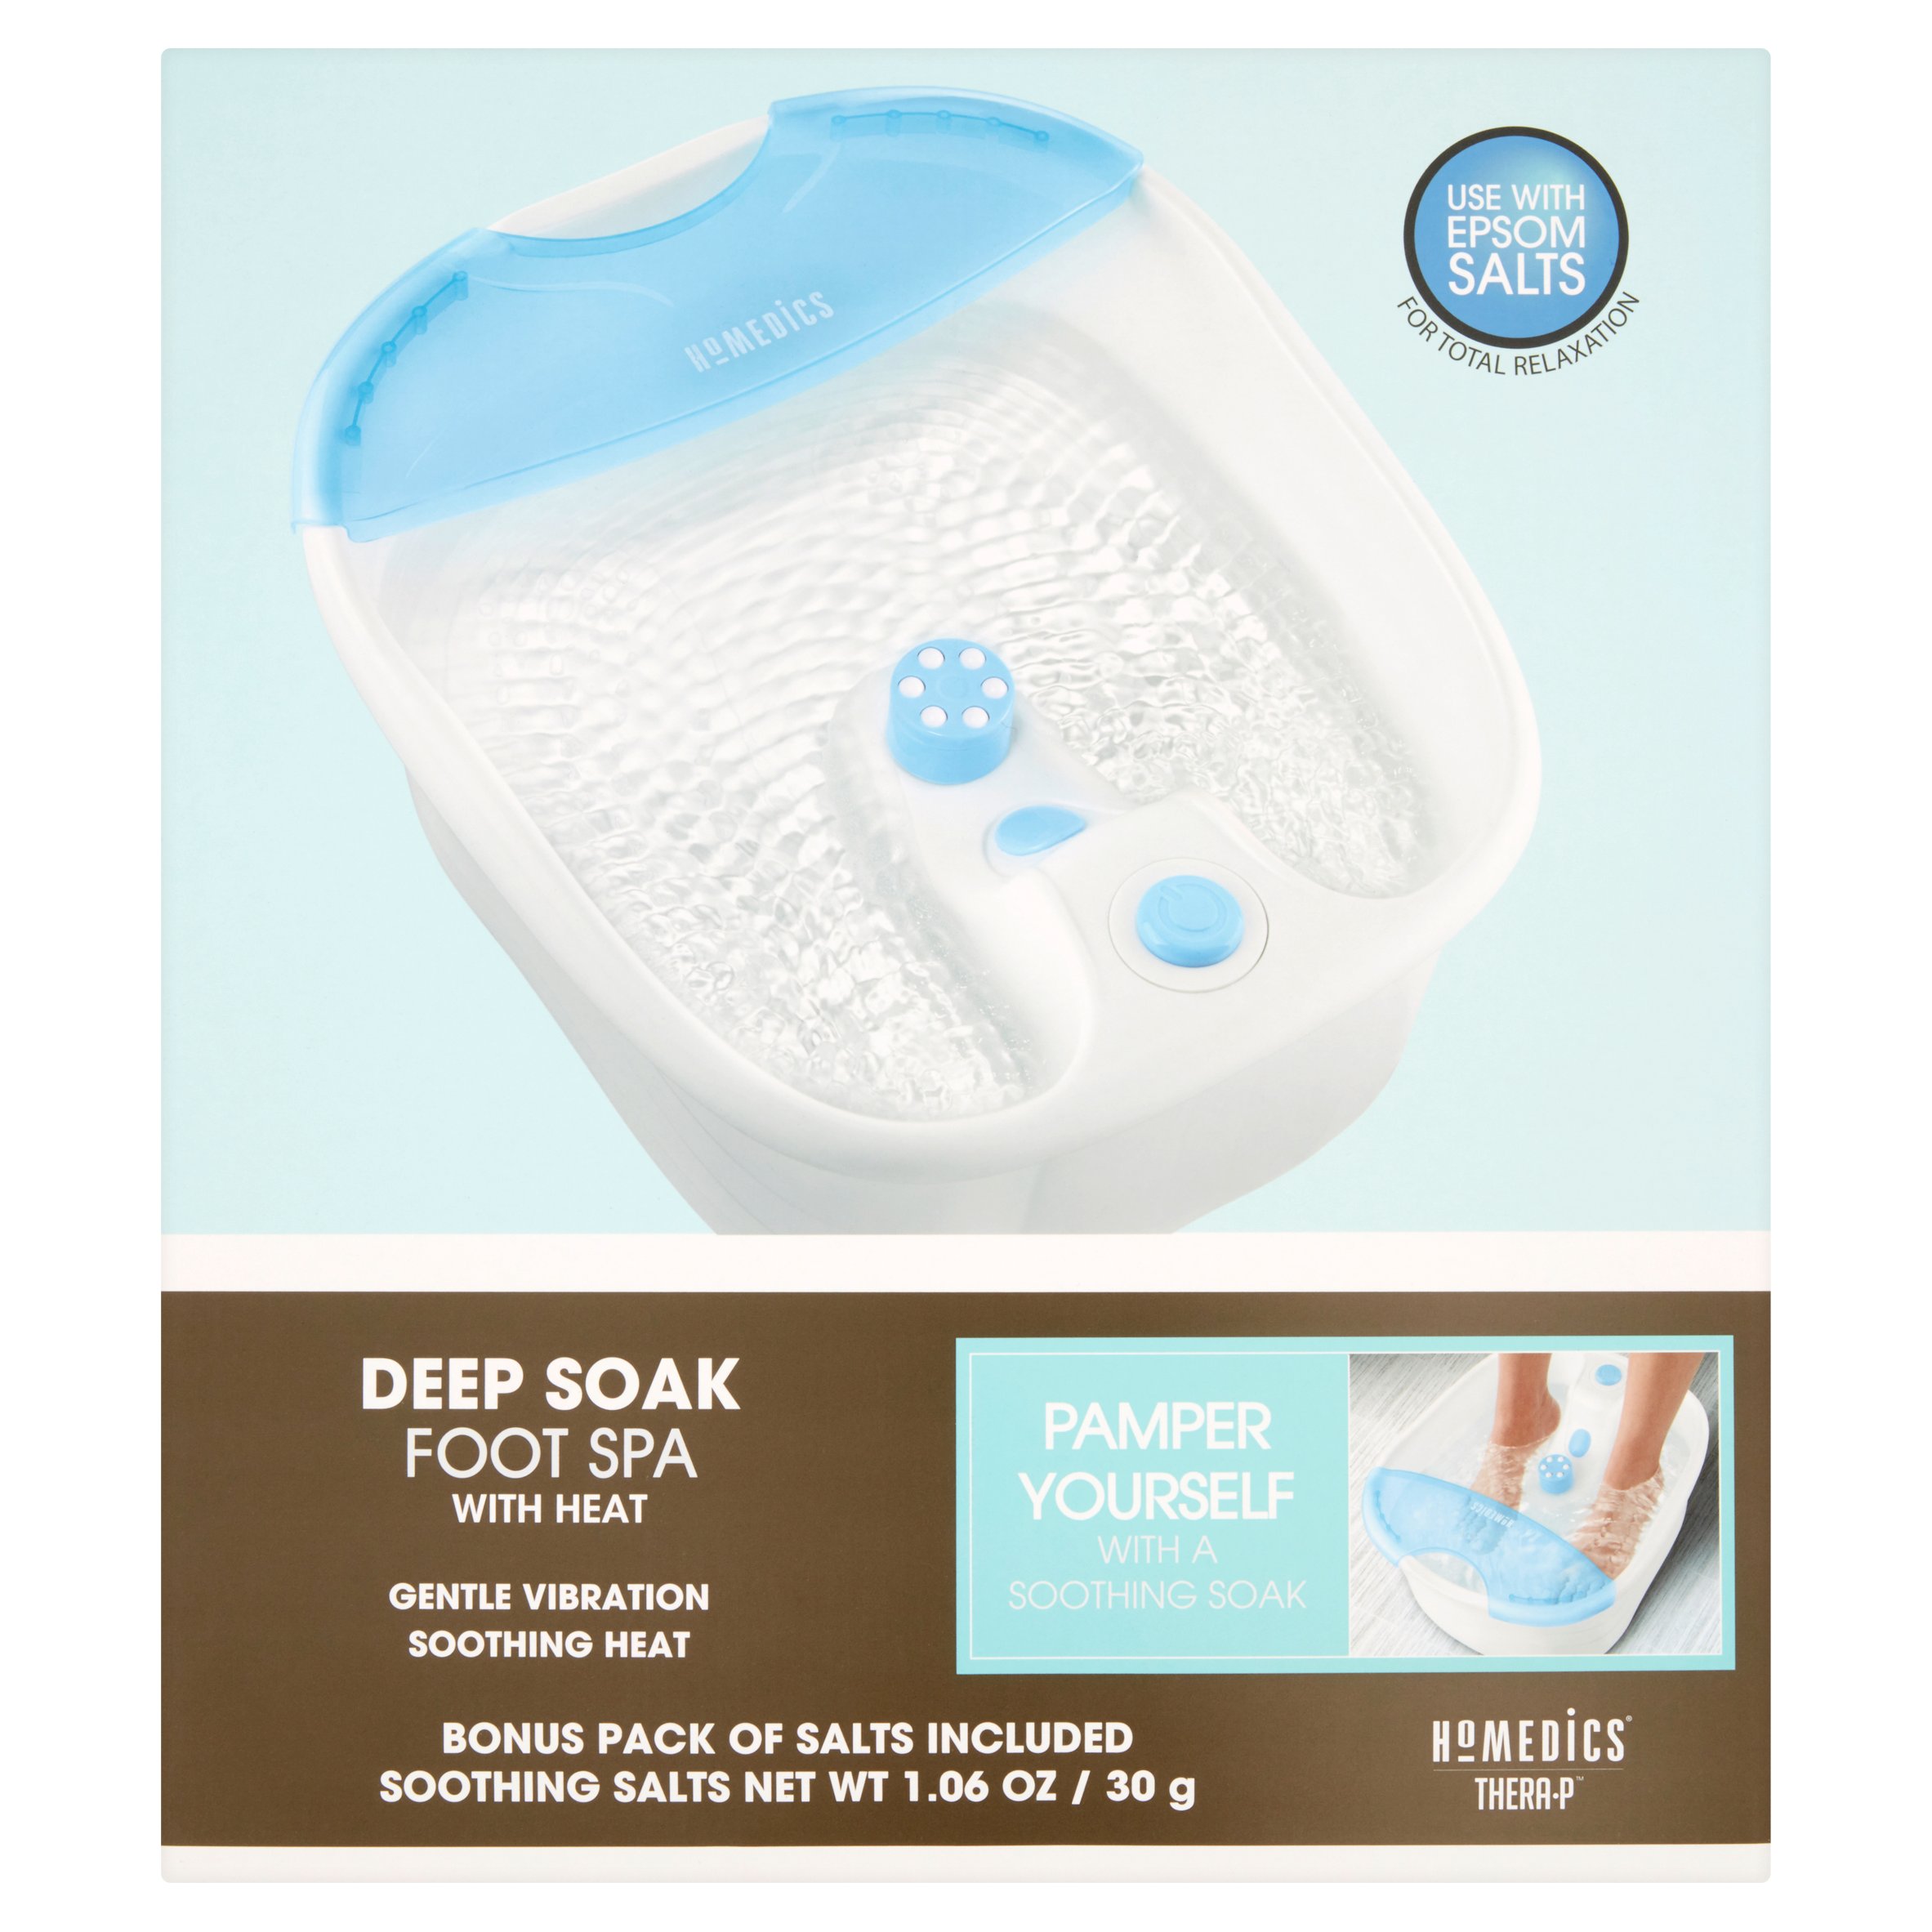 Homedics Foot Spa Reviews - The Best and Outstanding Home Foot Spas